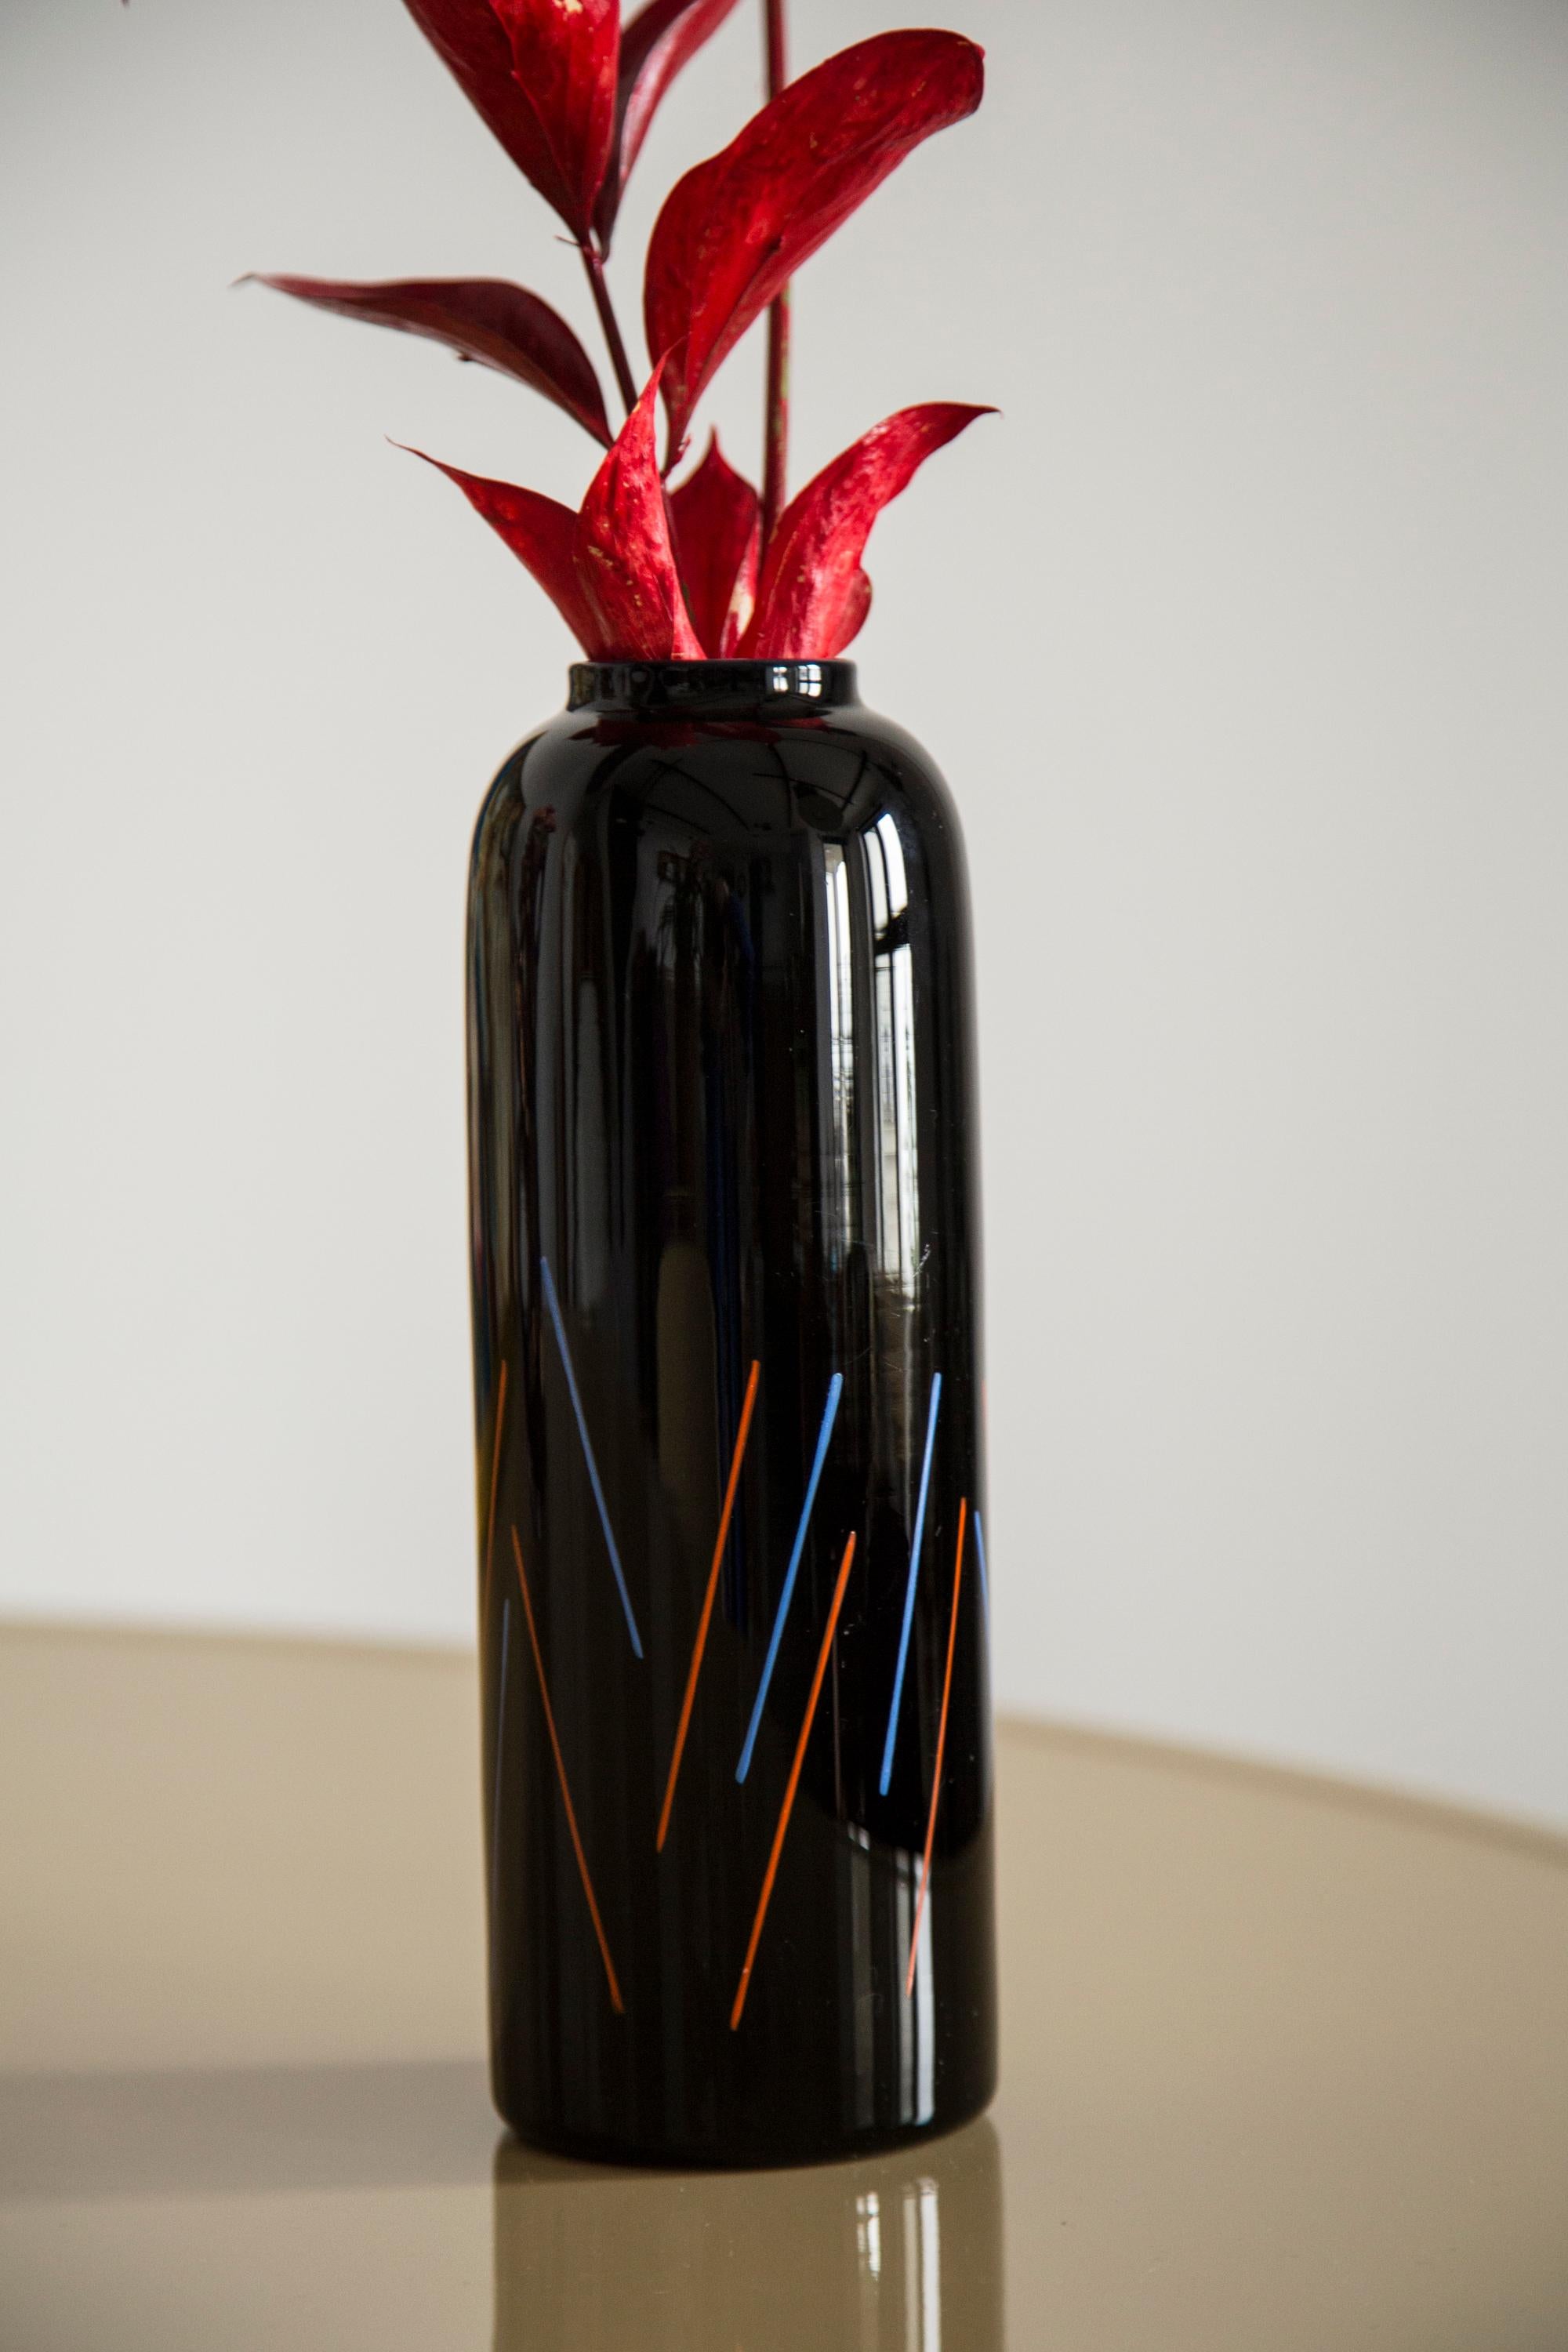 Glass Unique Hand Painted Black and Blue Red Vase, 20th Century, Europe, 2000s For Sale